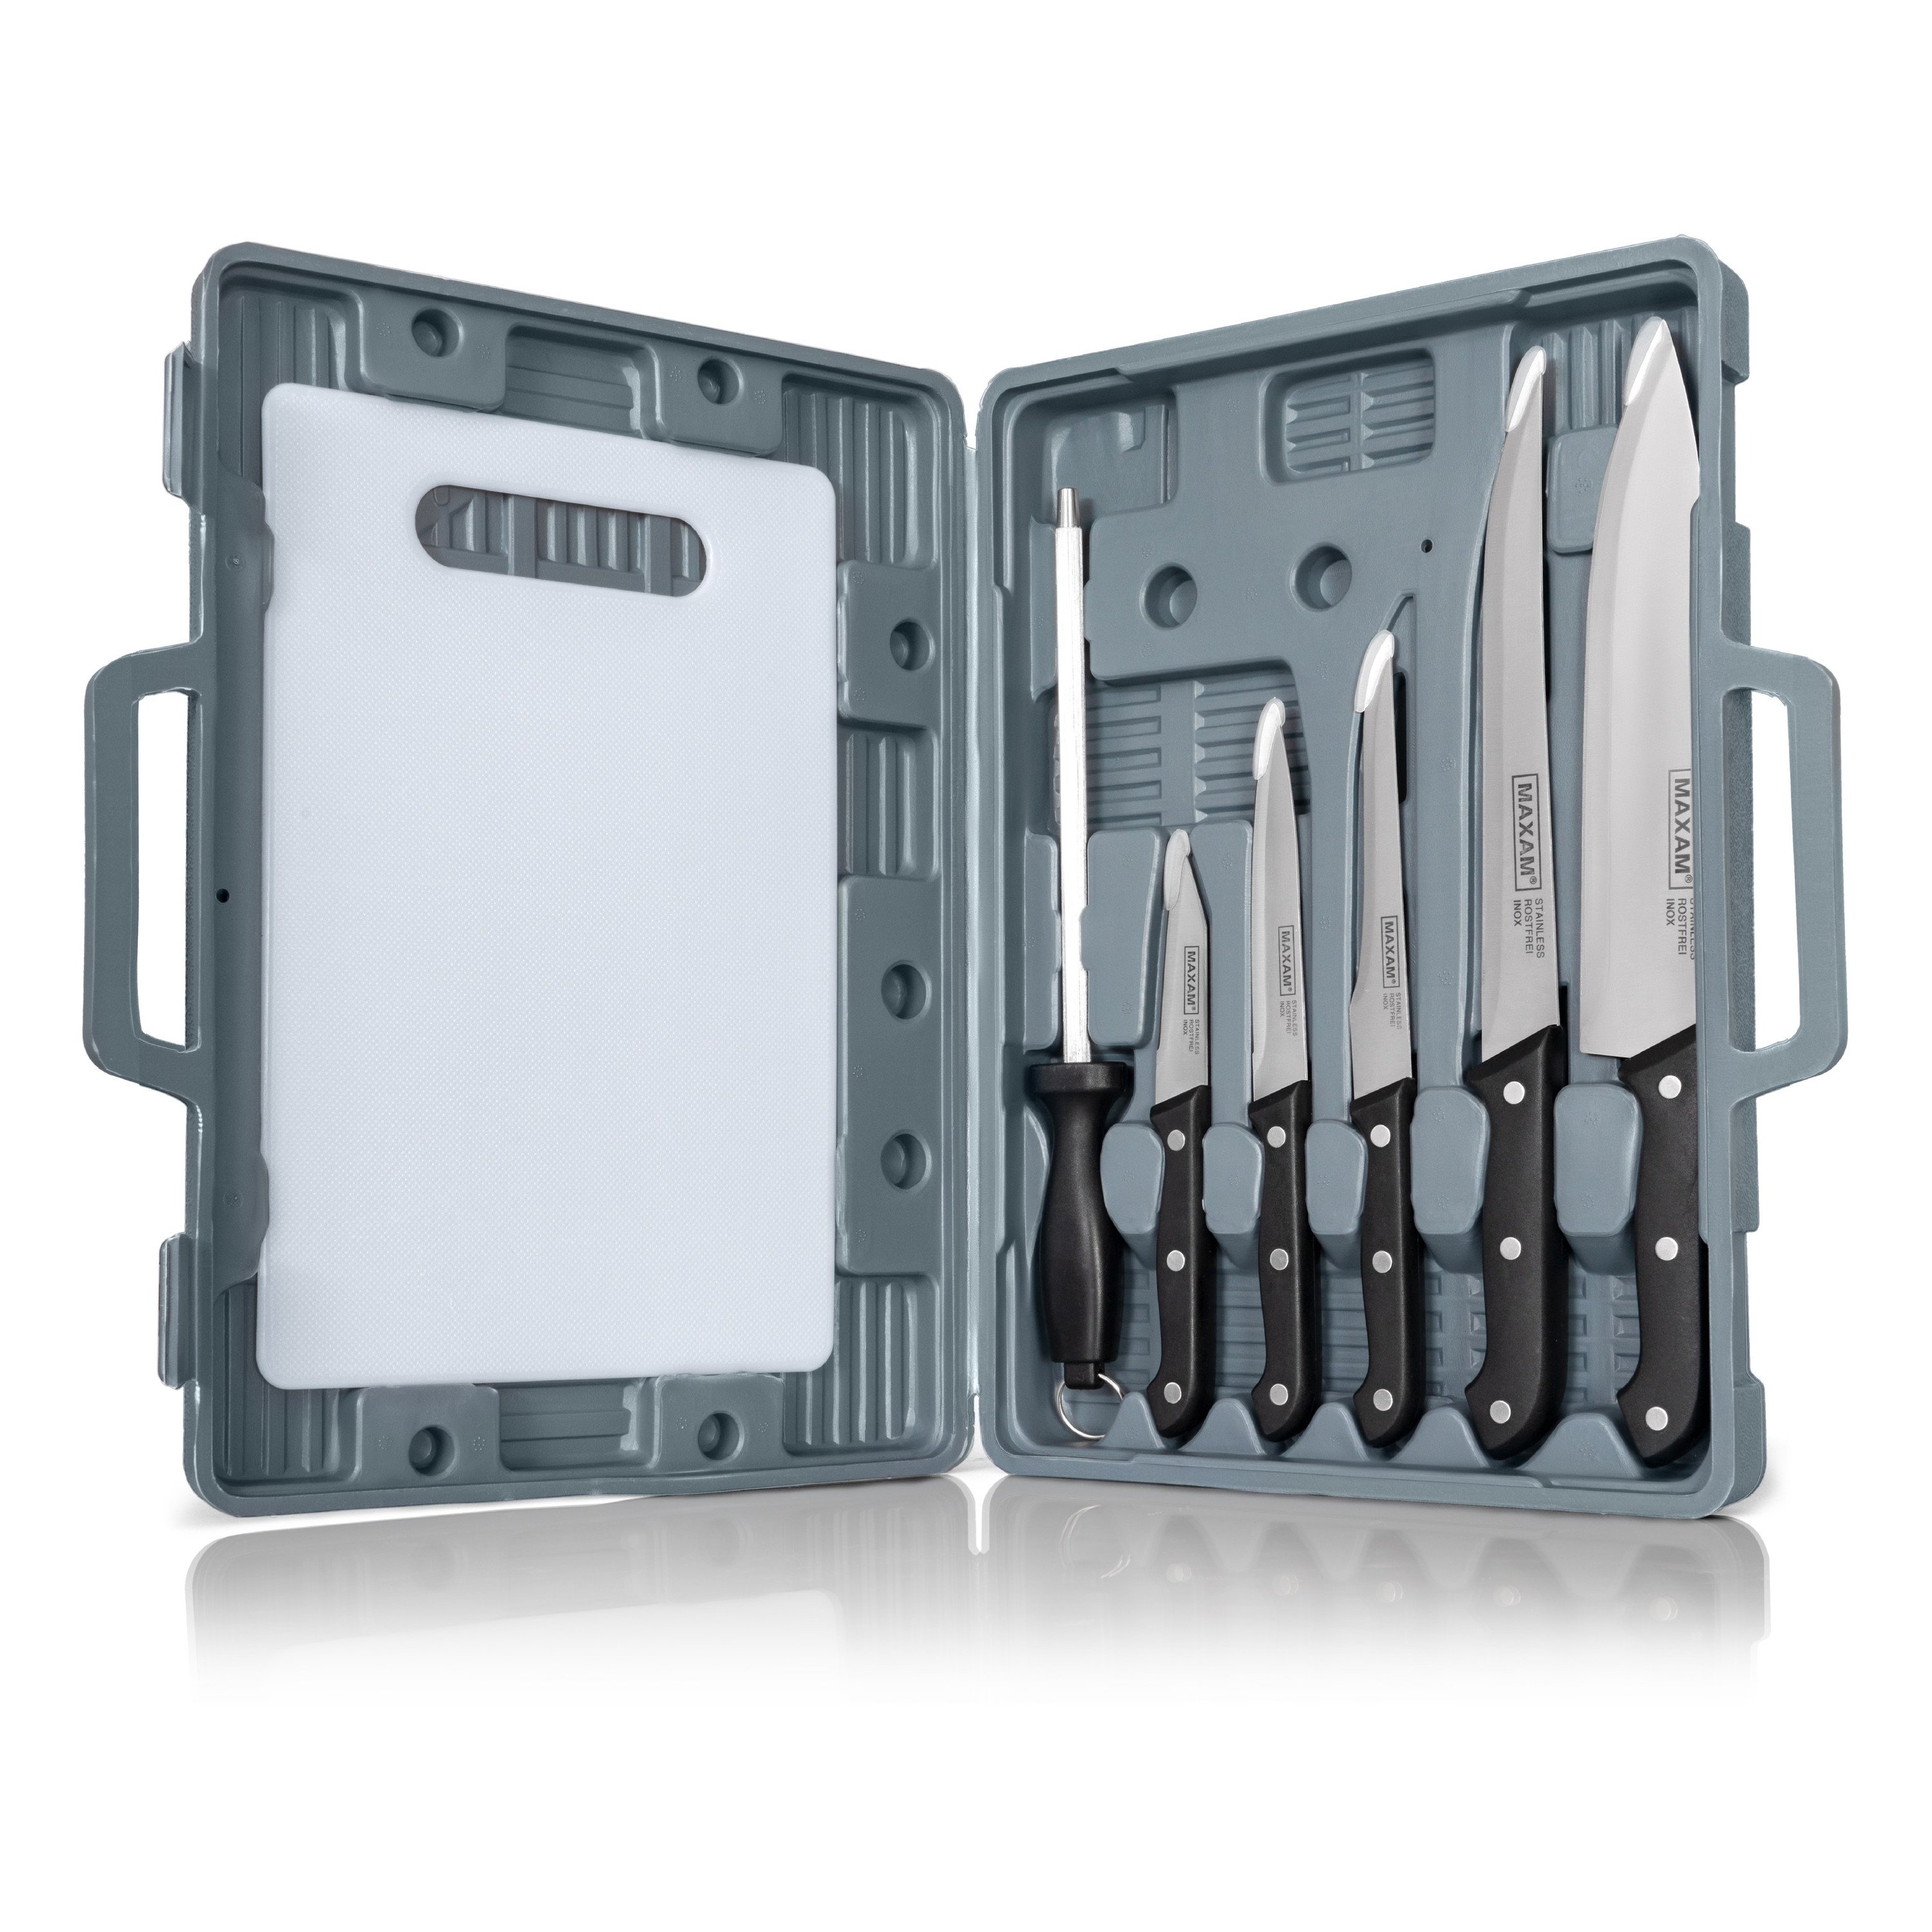 maxam stainless steel knife with cutting board case 14812